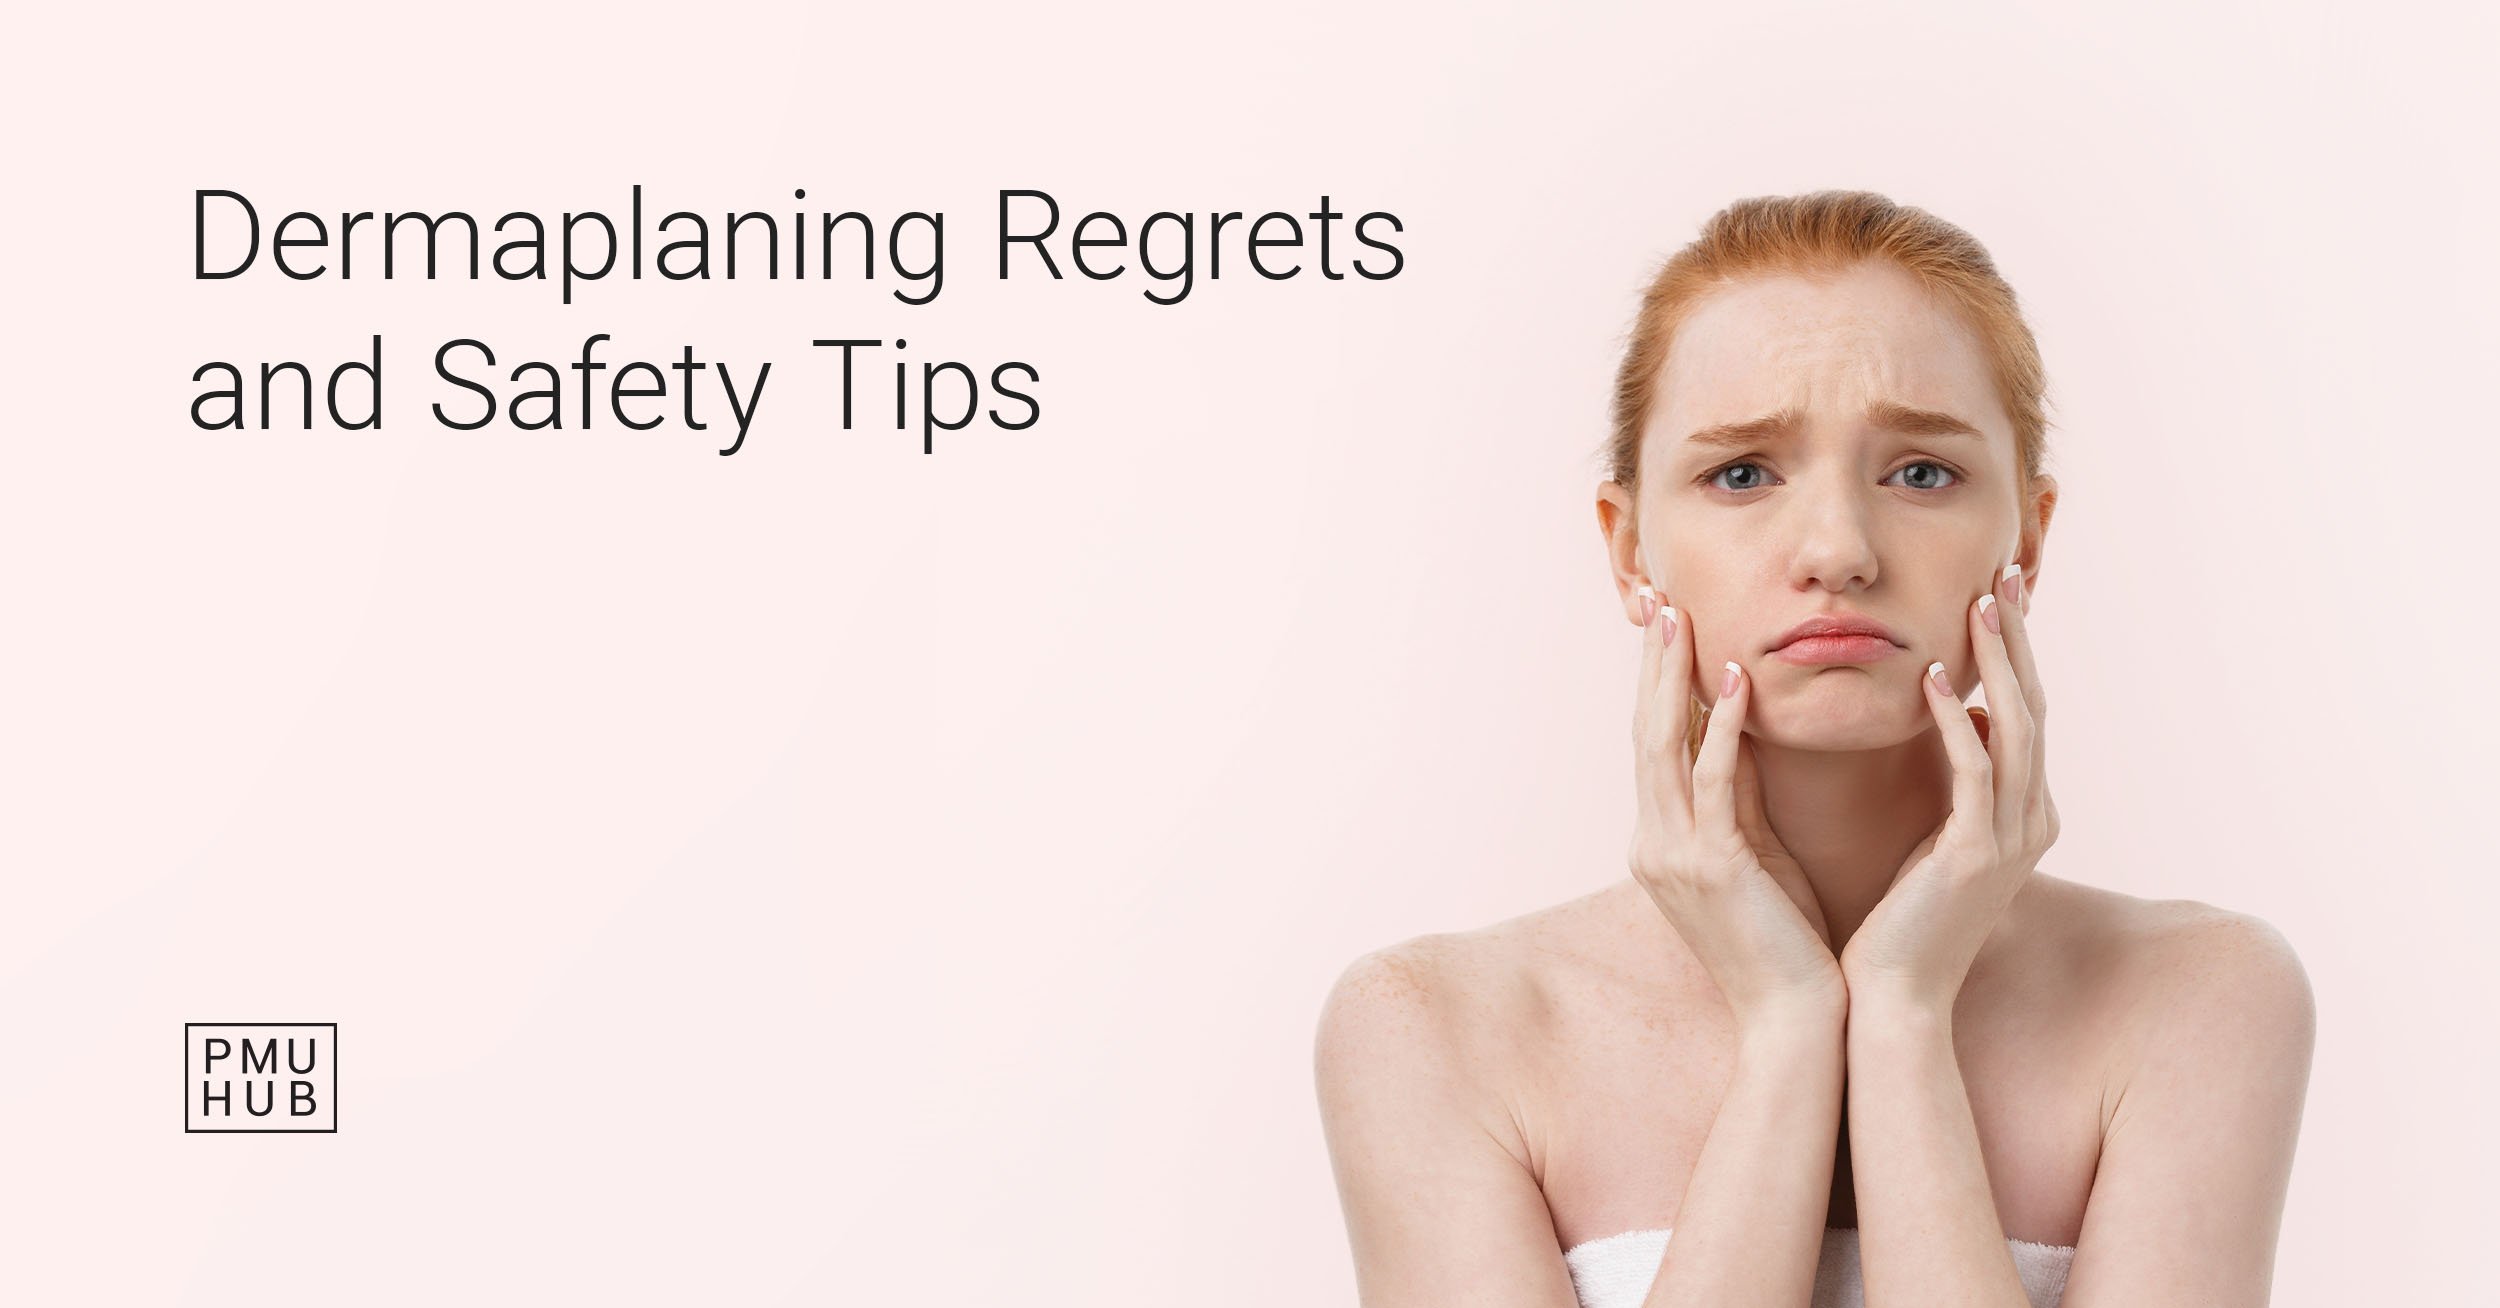 learn about dermaplaning regrets and prevention tips